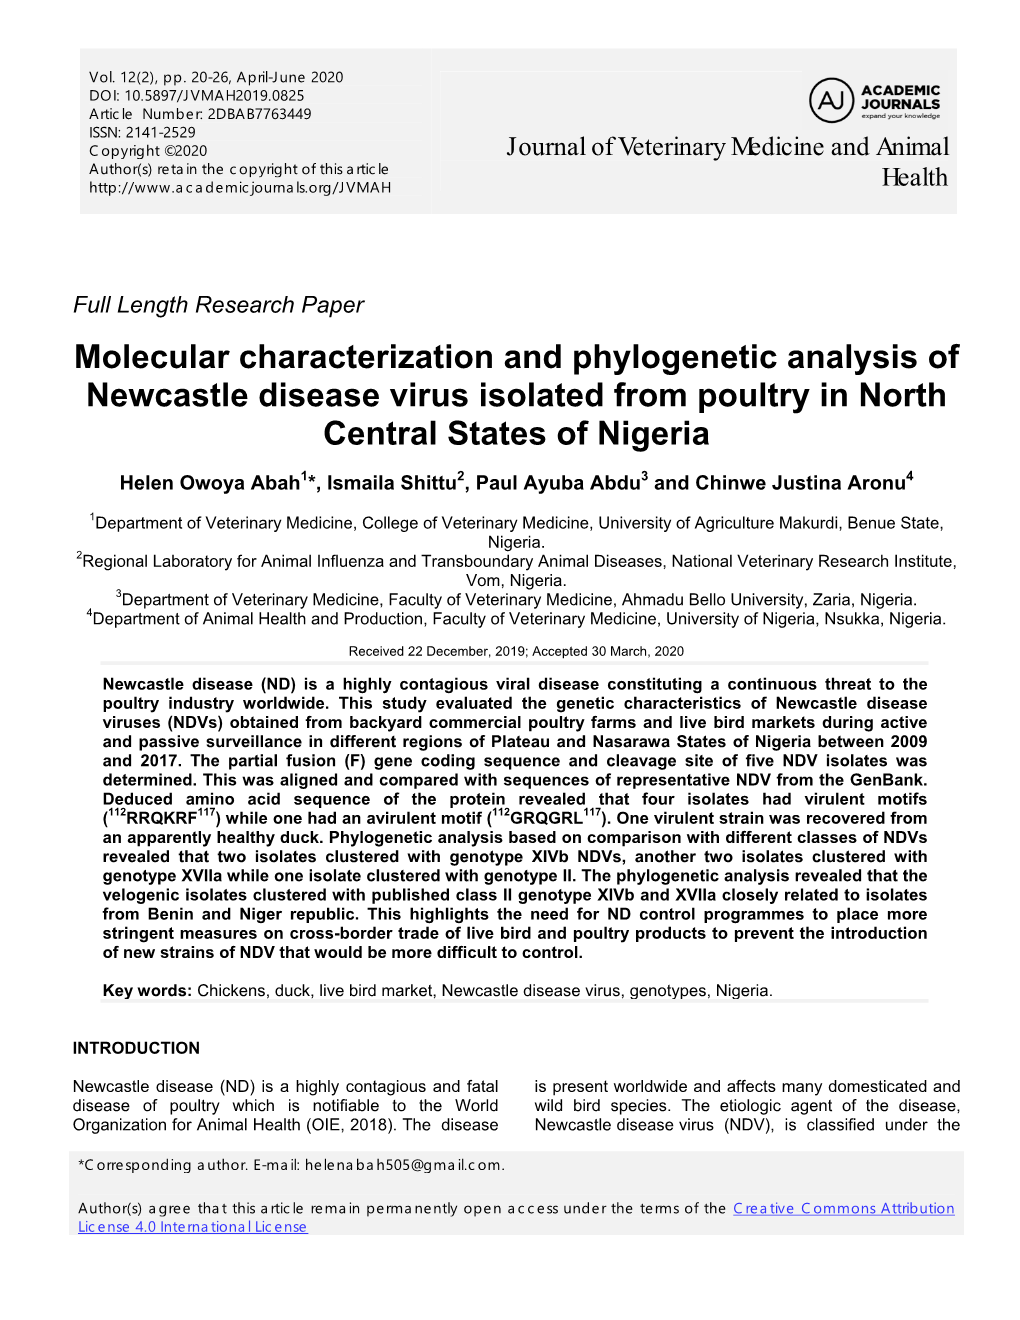 Molecular Characterization and Phylogenetic Analysis of Newcastle Disease Virus Isolated from Poultry in North Central States of Nigeria